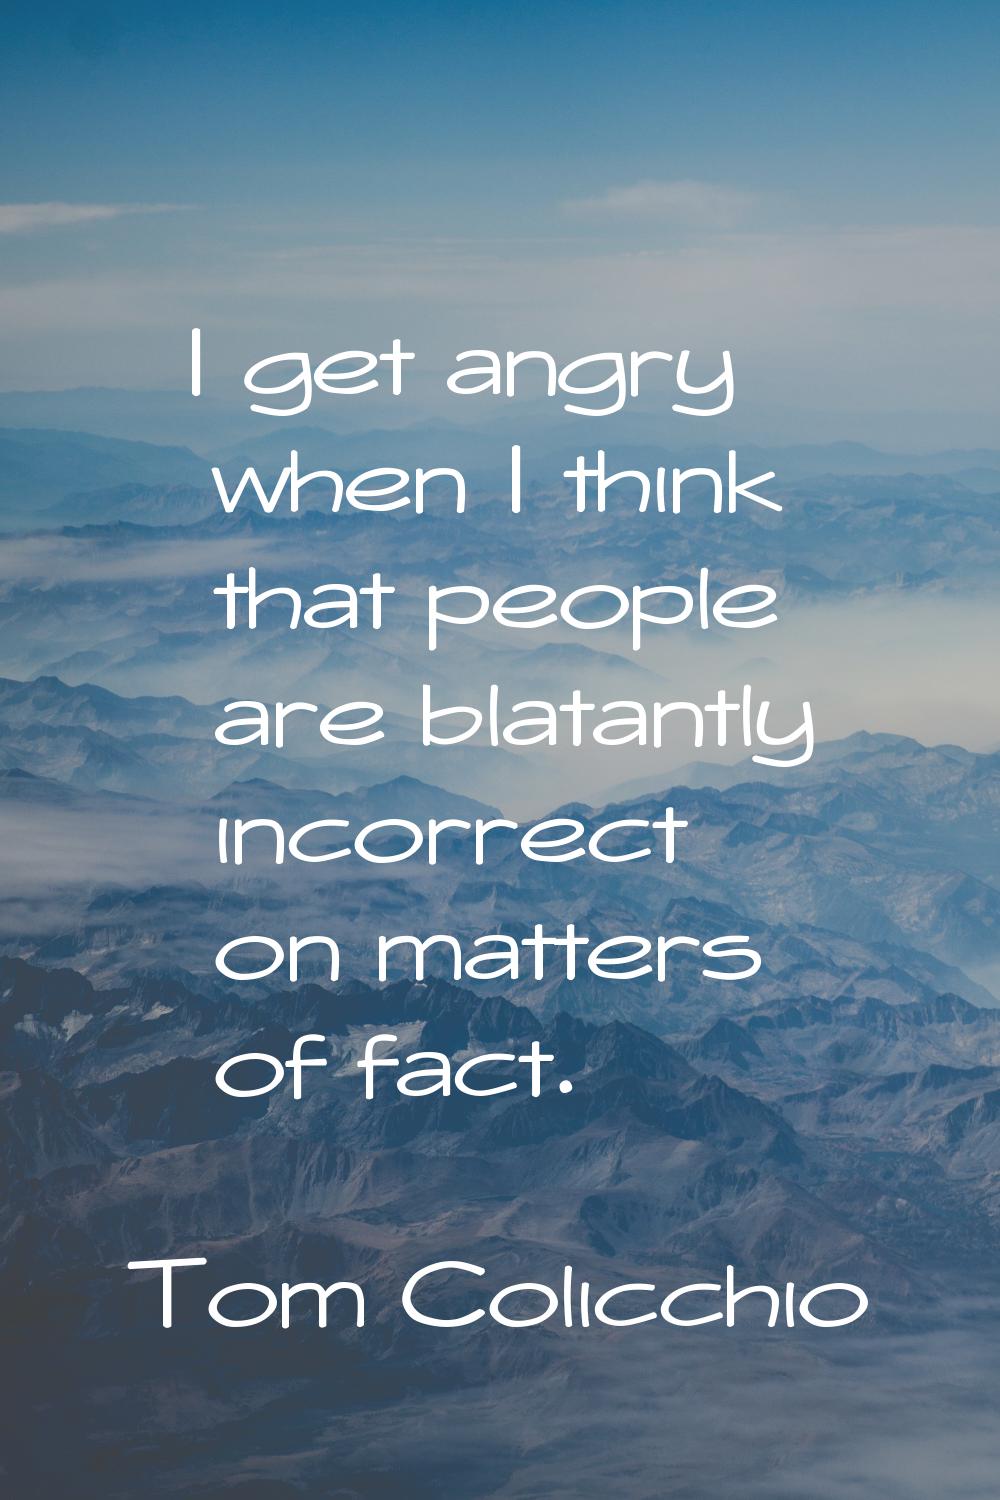 I get angry when I think that people are blatantly incorrect on matters of fact.